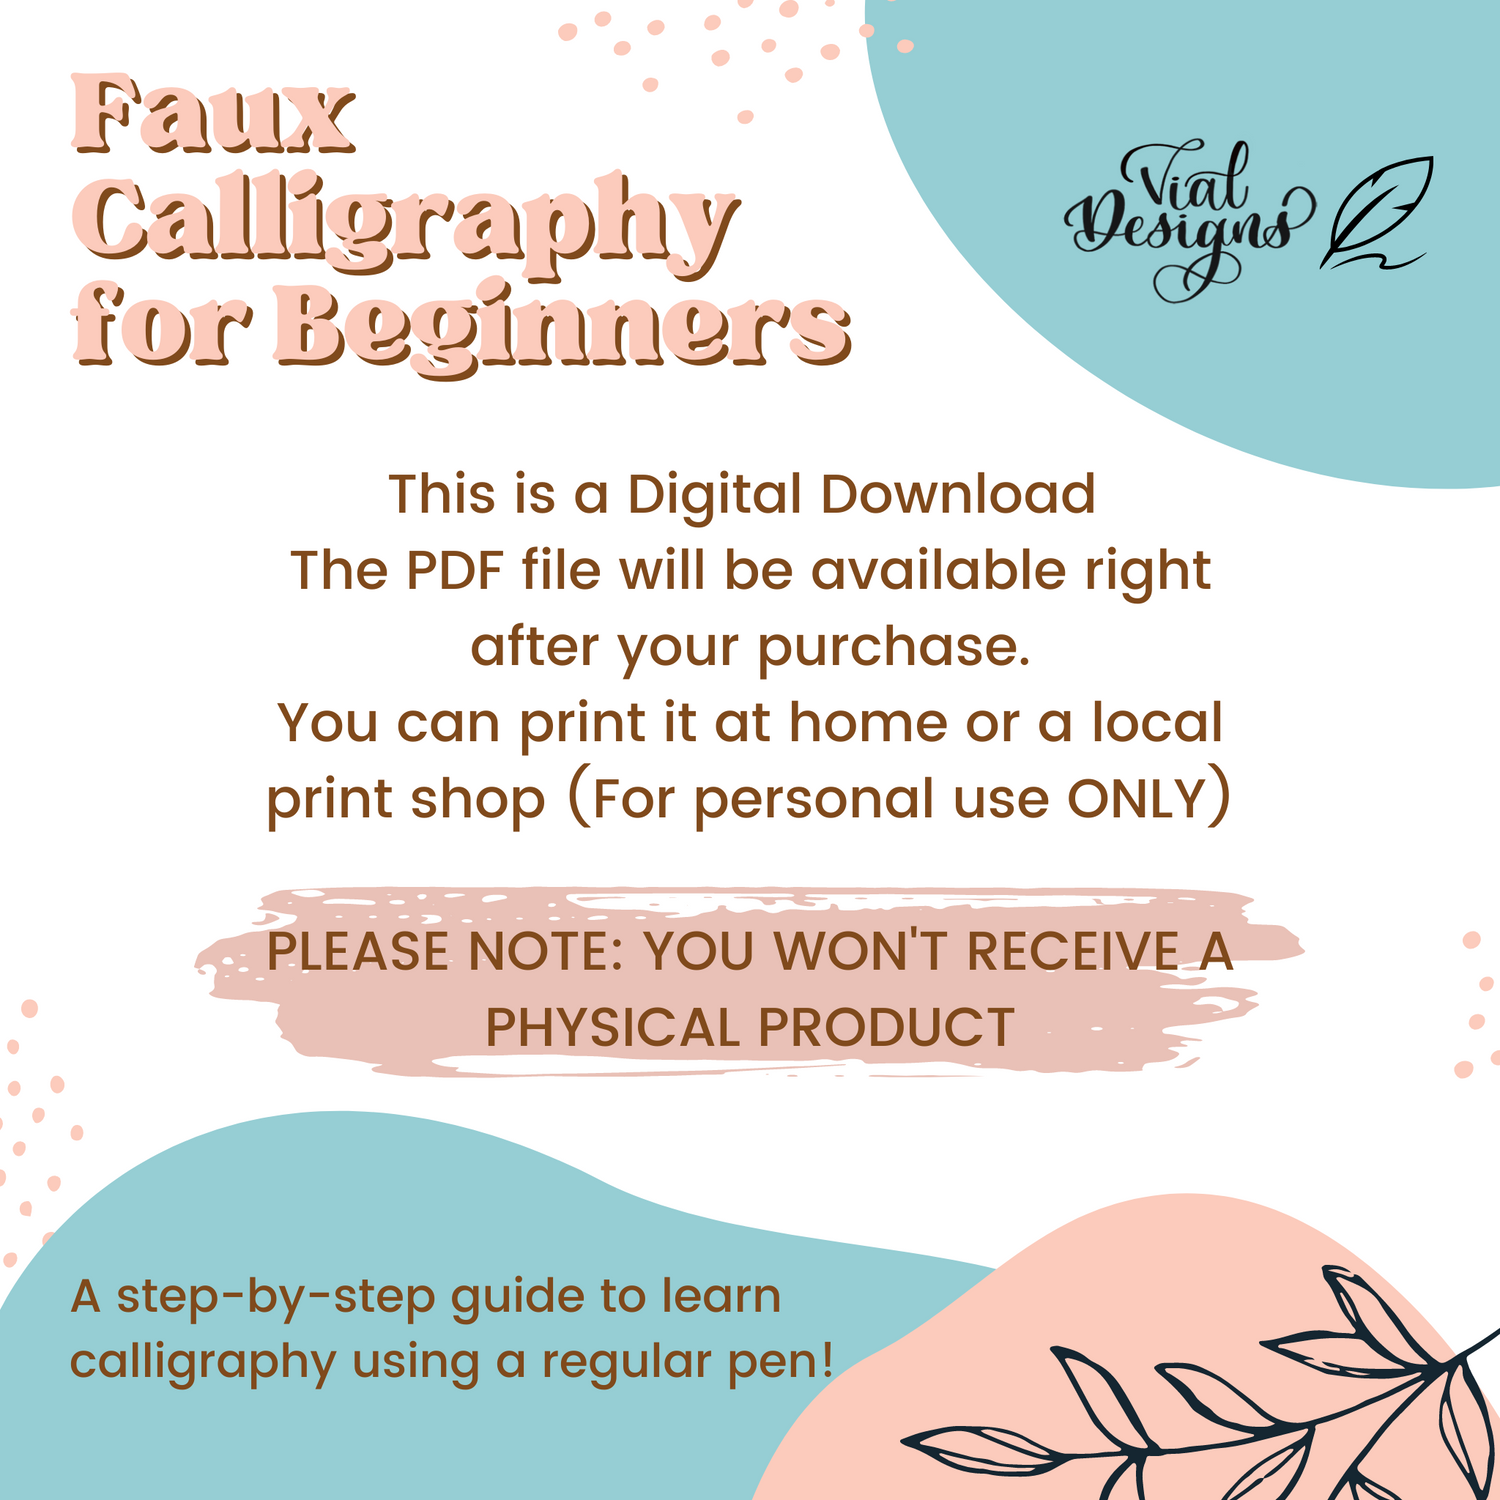 Faux Calligraphy guide for beginners as a digital download PDF